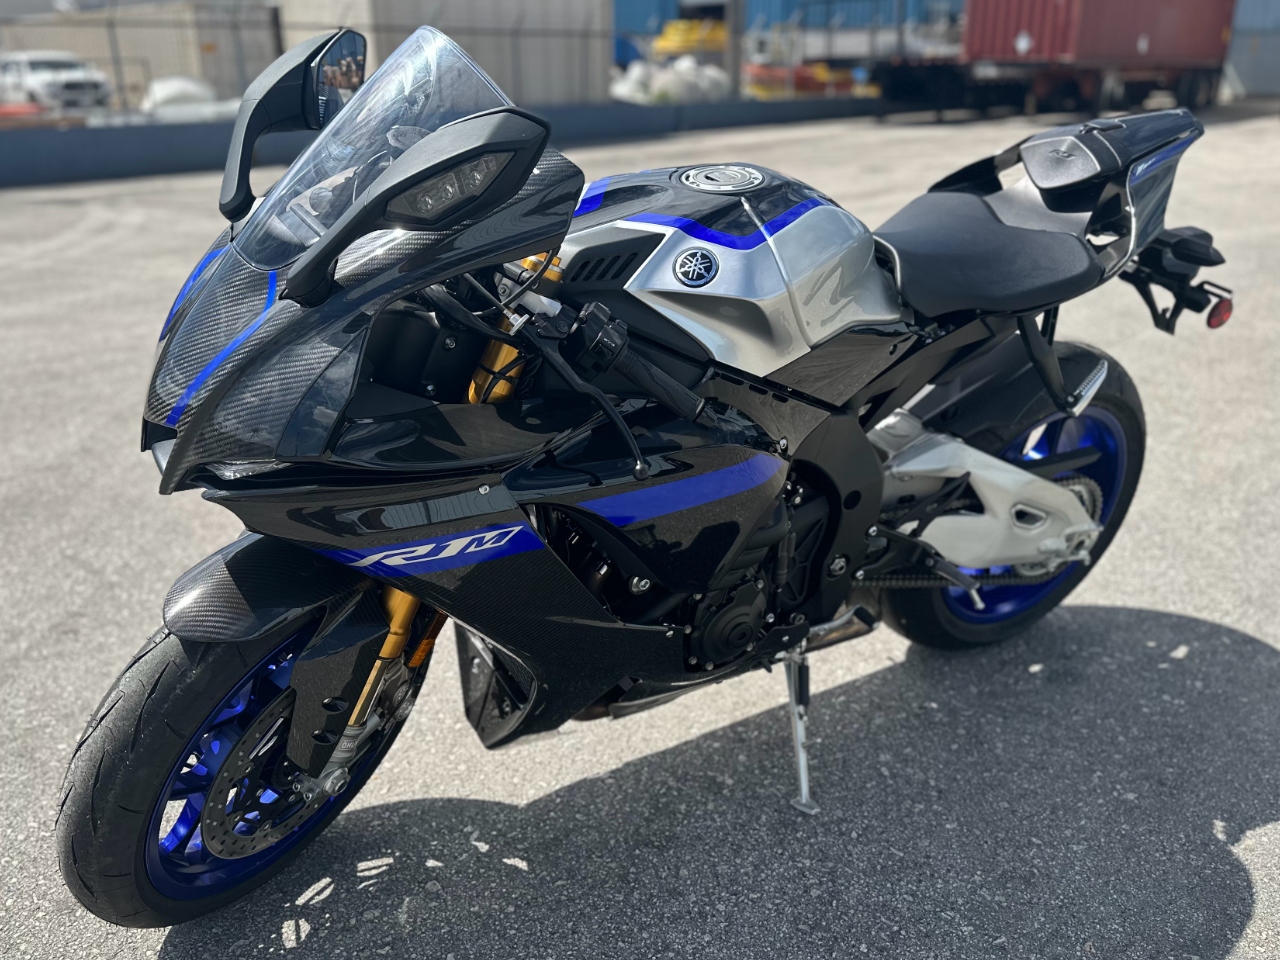 2022 Yamaha Yzf R1M Preview 01